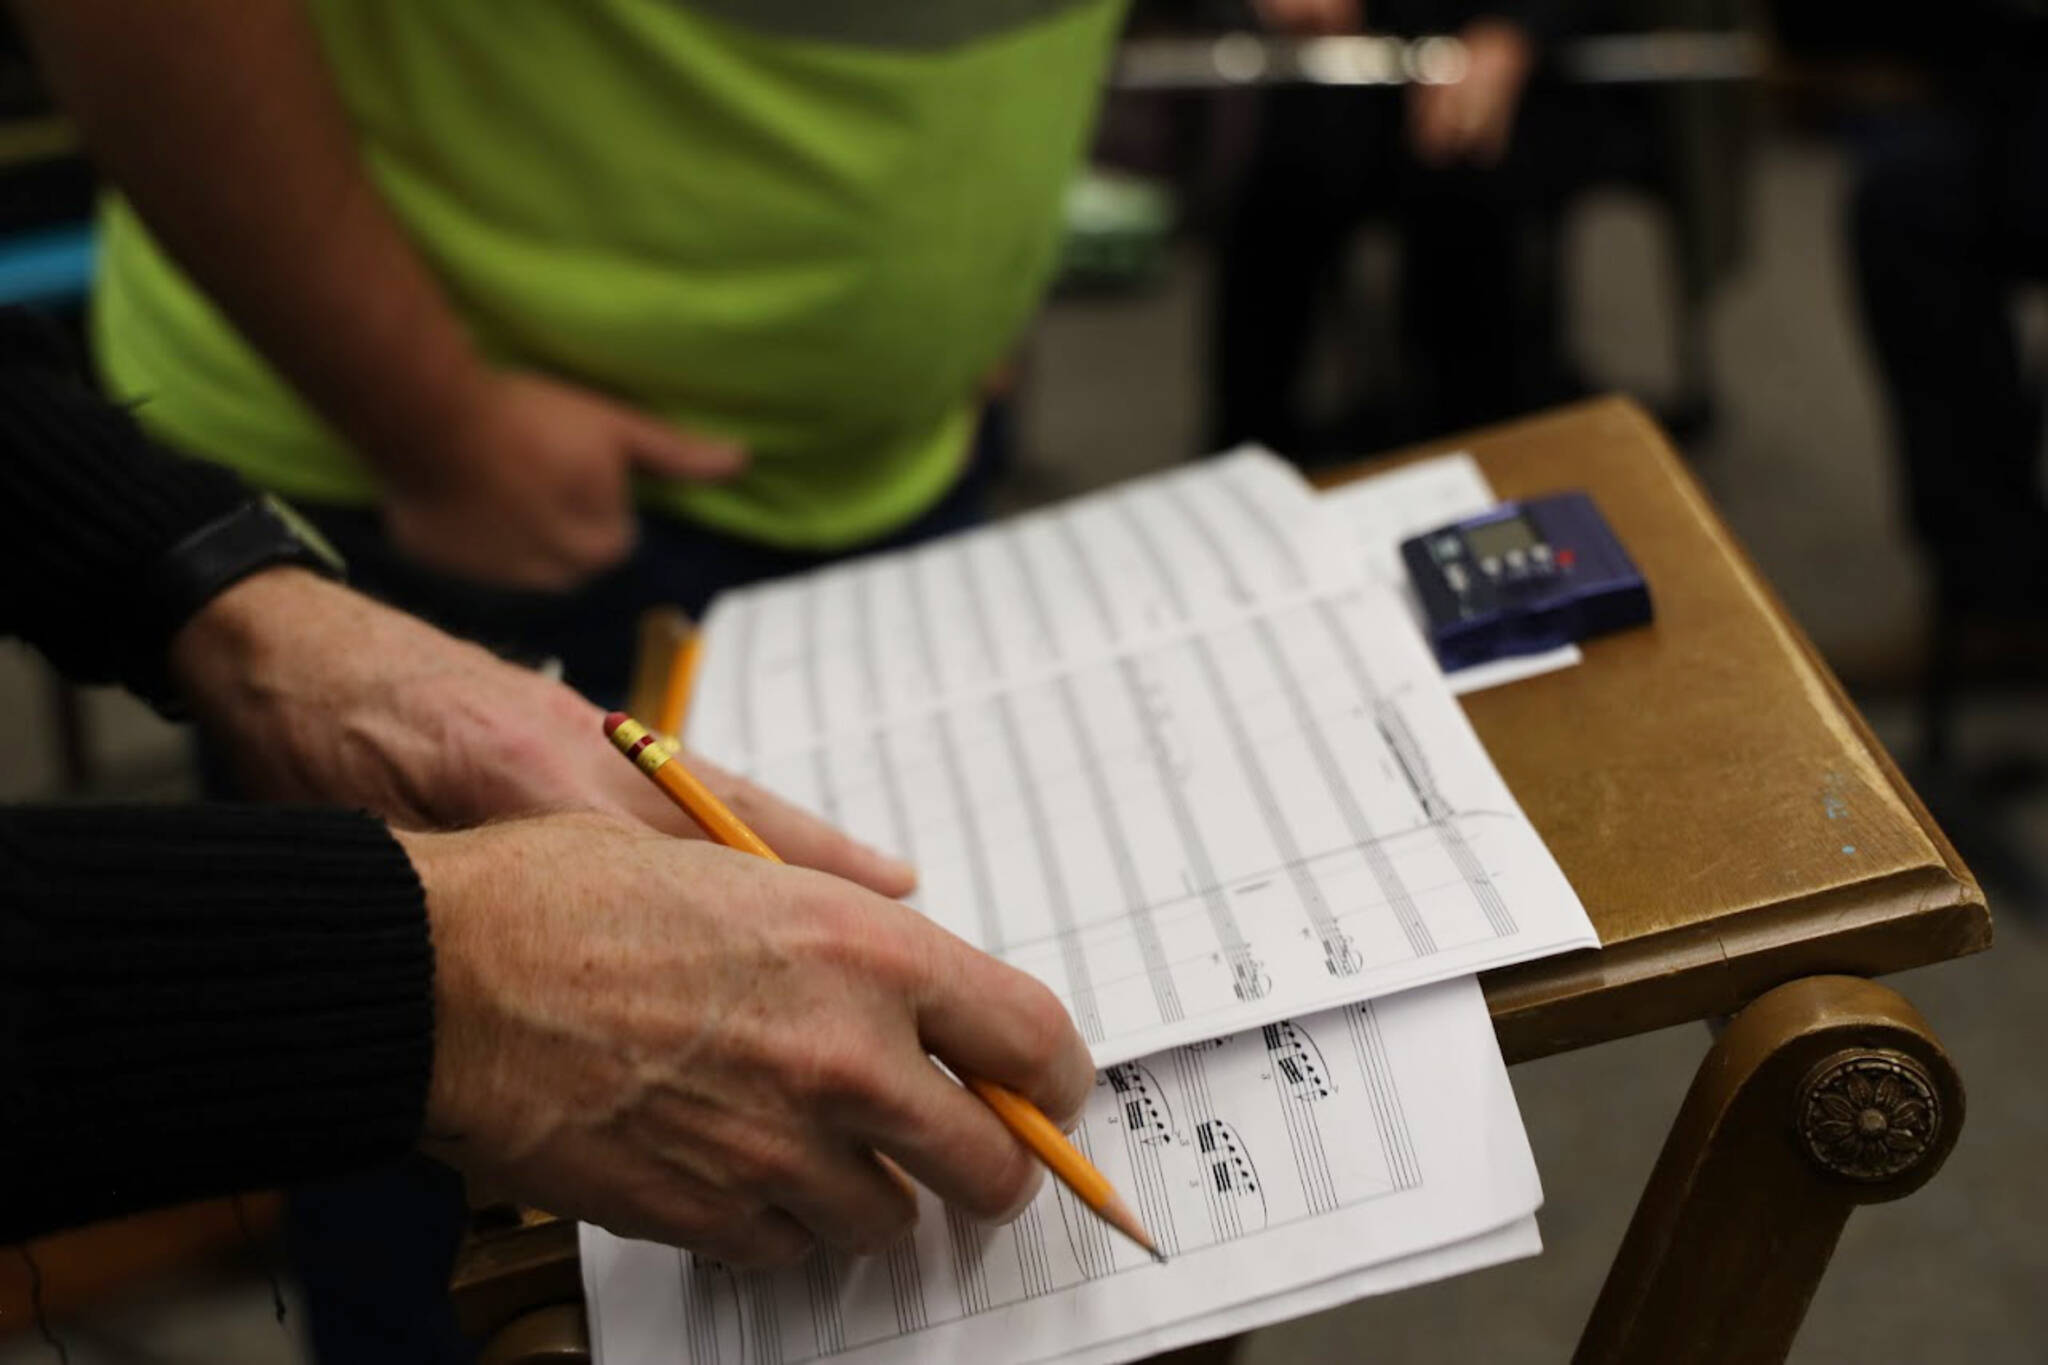 Mike Bucy writes on the score of local composer and musician Ben Holtz’s piece, Atmosphere with Radio Occultation, during the Con Brio Chamber Series’ Tuesday evening rehearsal. (Clarise Larson / Juneau Empire)